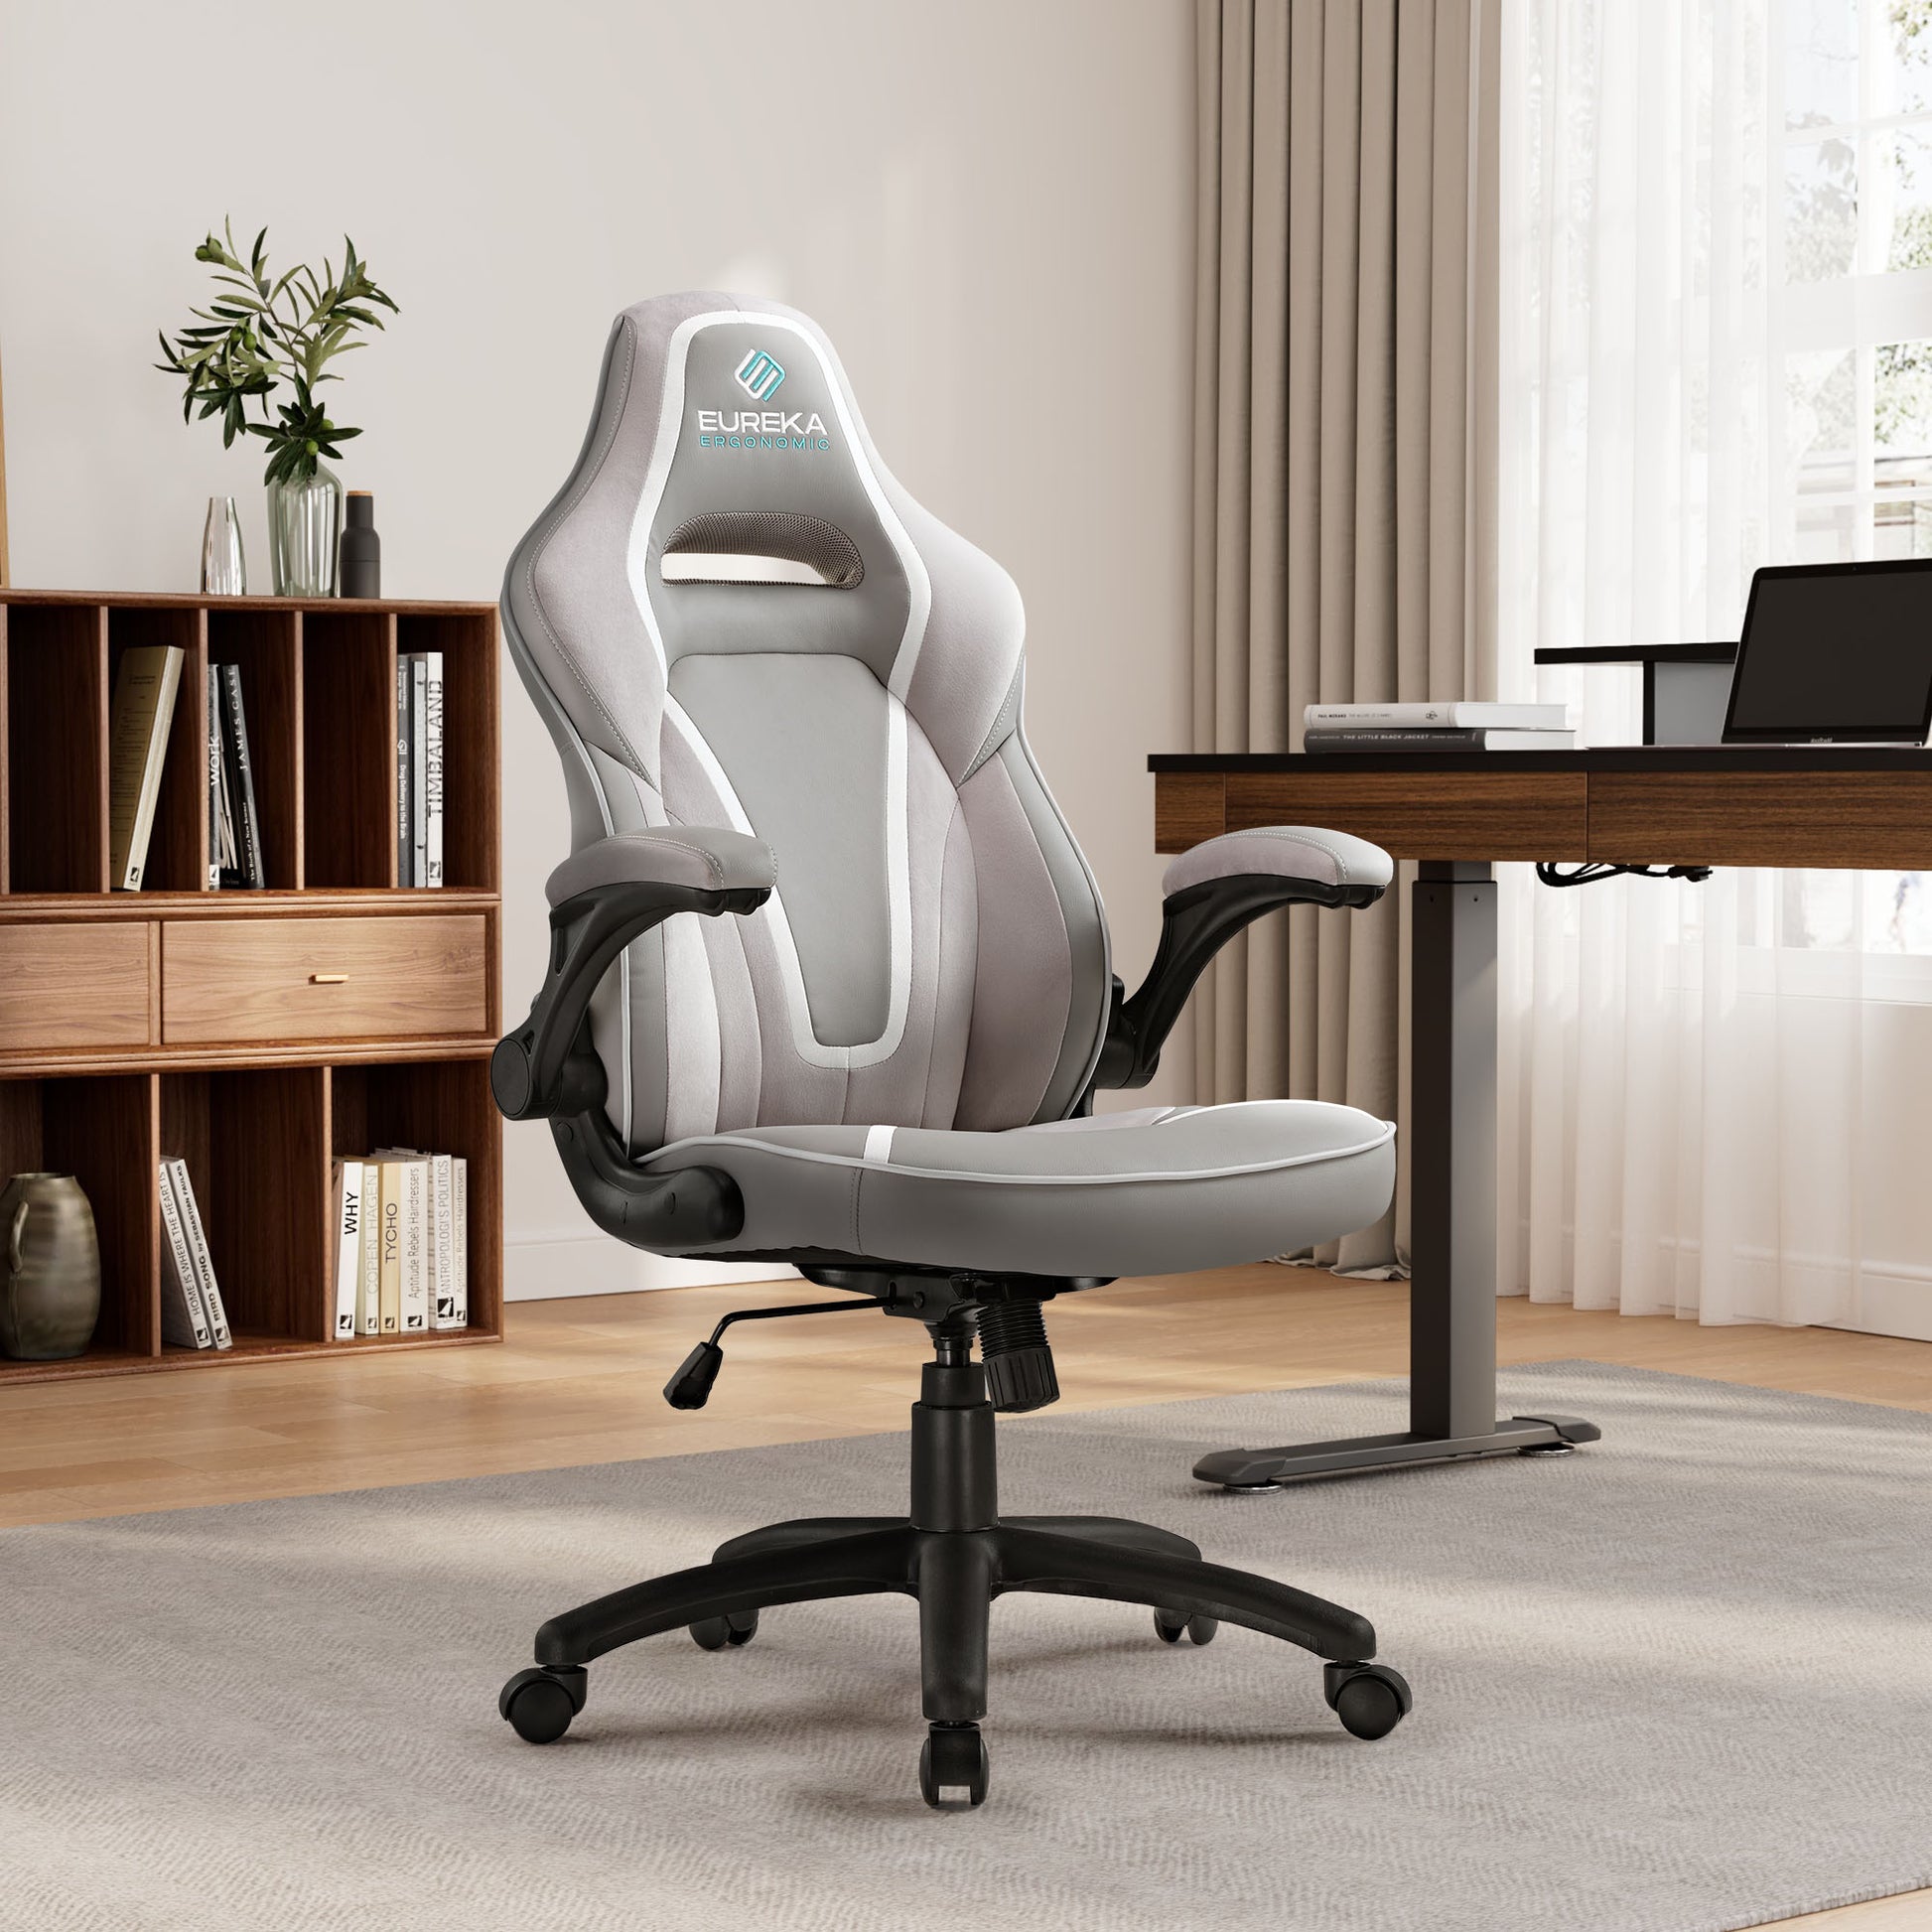 Eureka, Blue High-back Racing Seat Lumbar Support Leather Gaming Chair,Gray